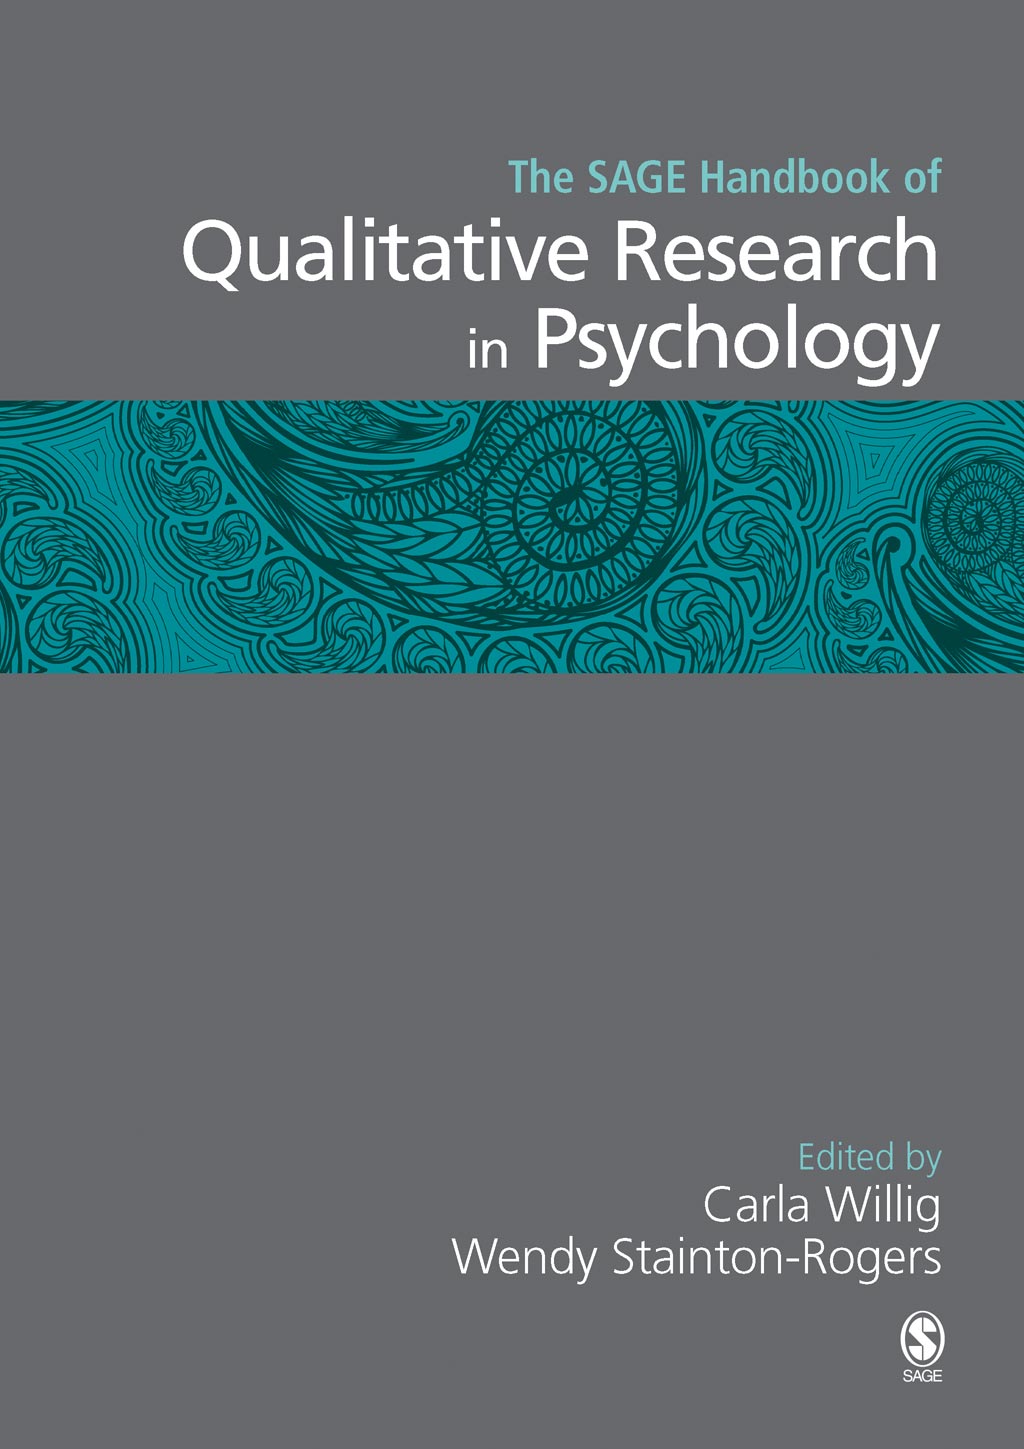 The SAGE Handbook of Qualitative Research in Psychology - Carla Willig, Wendy Stainton-Rogers